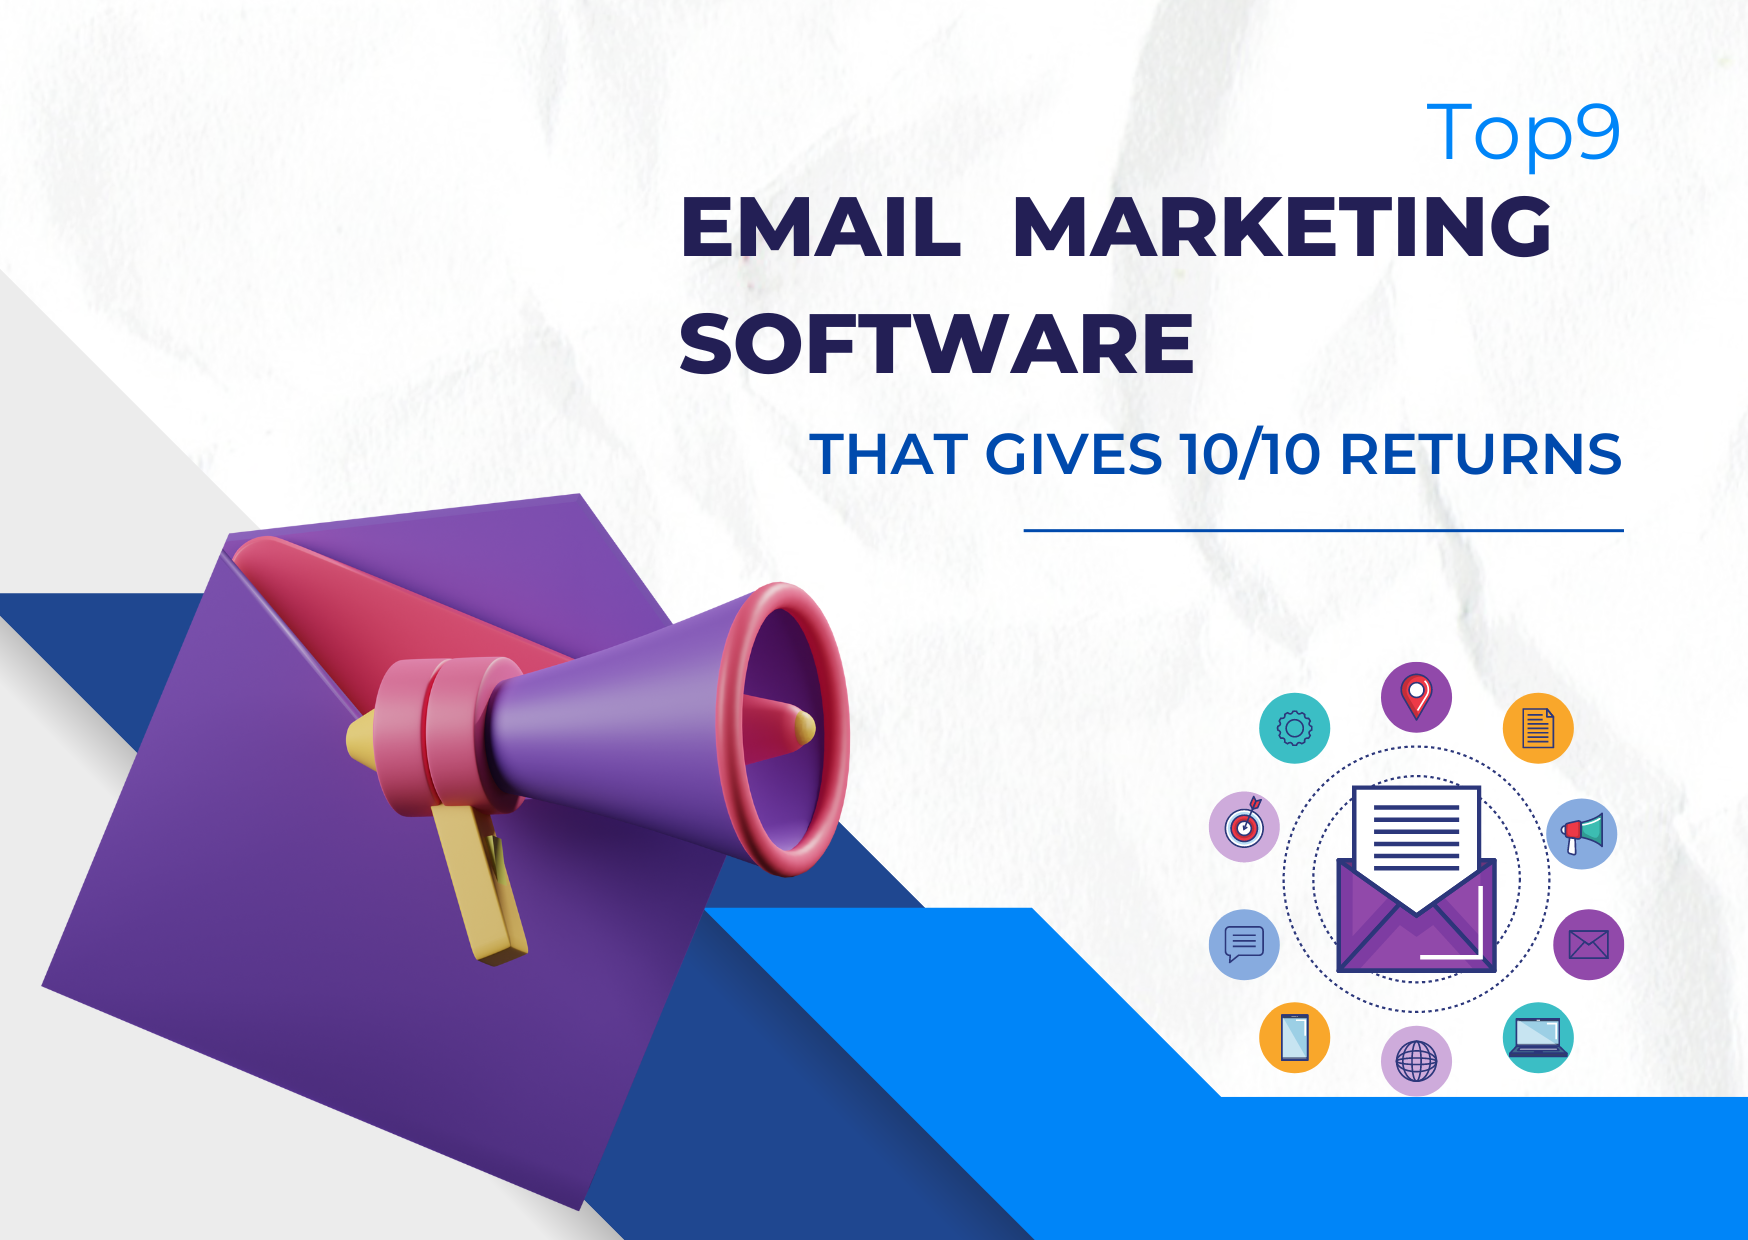 Top 9 Email Marketing Software That Gives 10/10 Returns